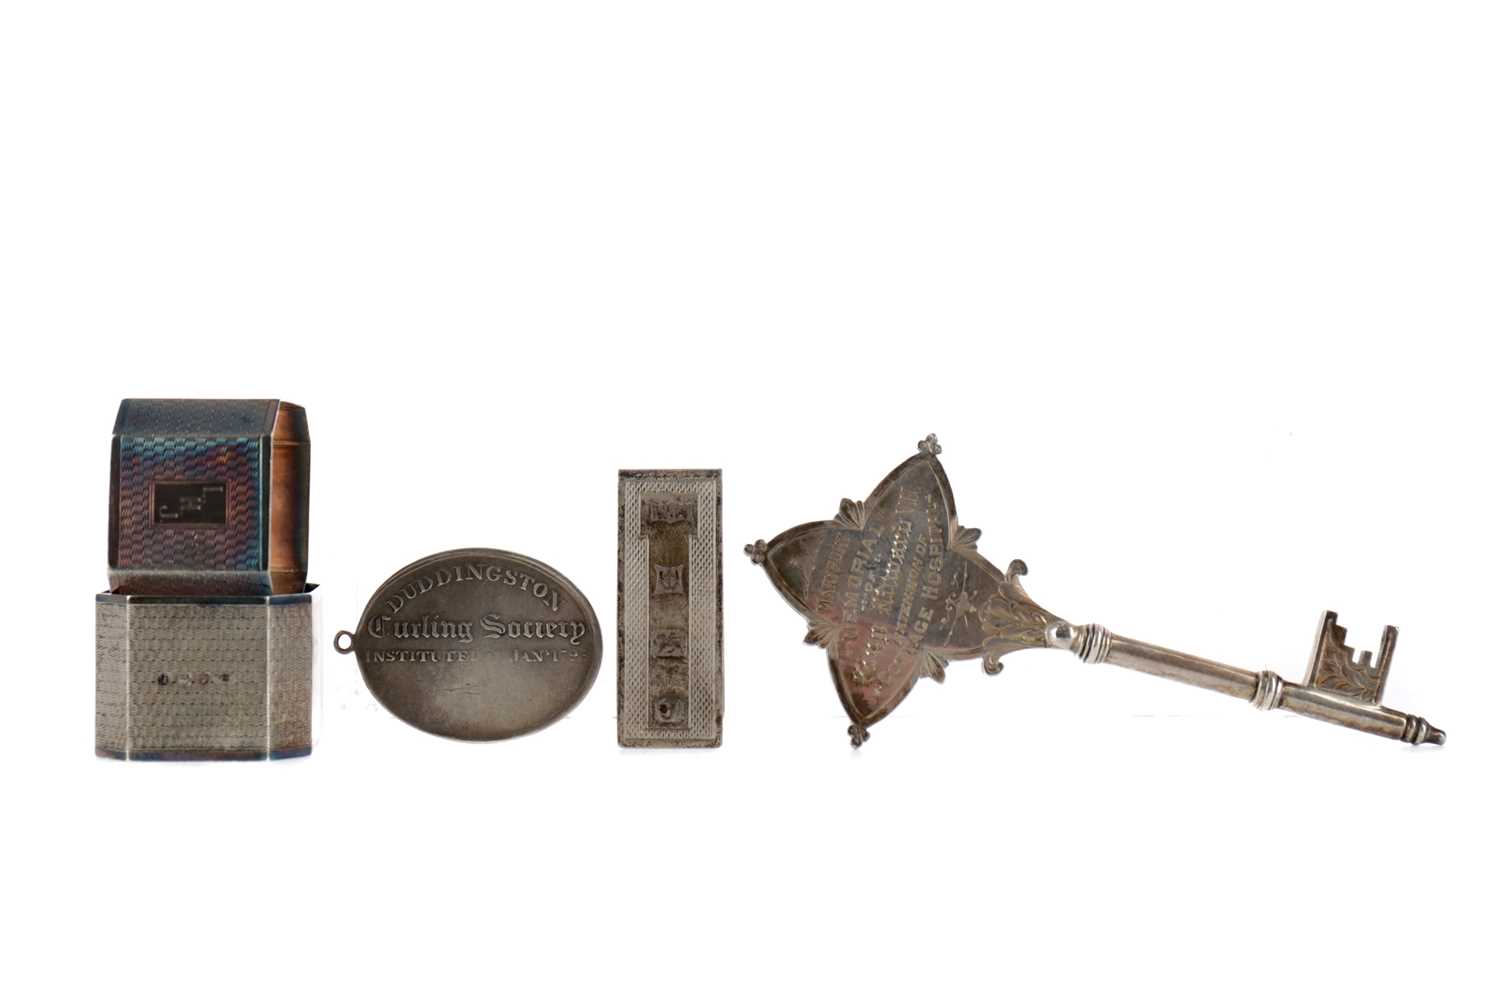 Lot 475 - A GEORGE V SILVER PRESENTATION KEY, ALONG WITH TWO NAPKIN RINGS A MONEY CLIP AND A MEDAL